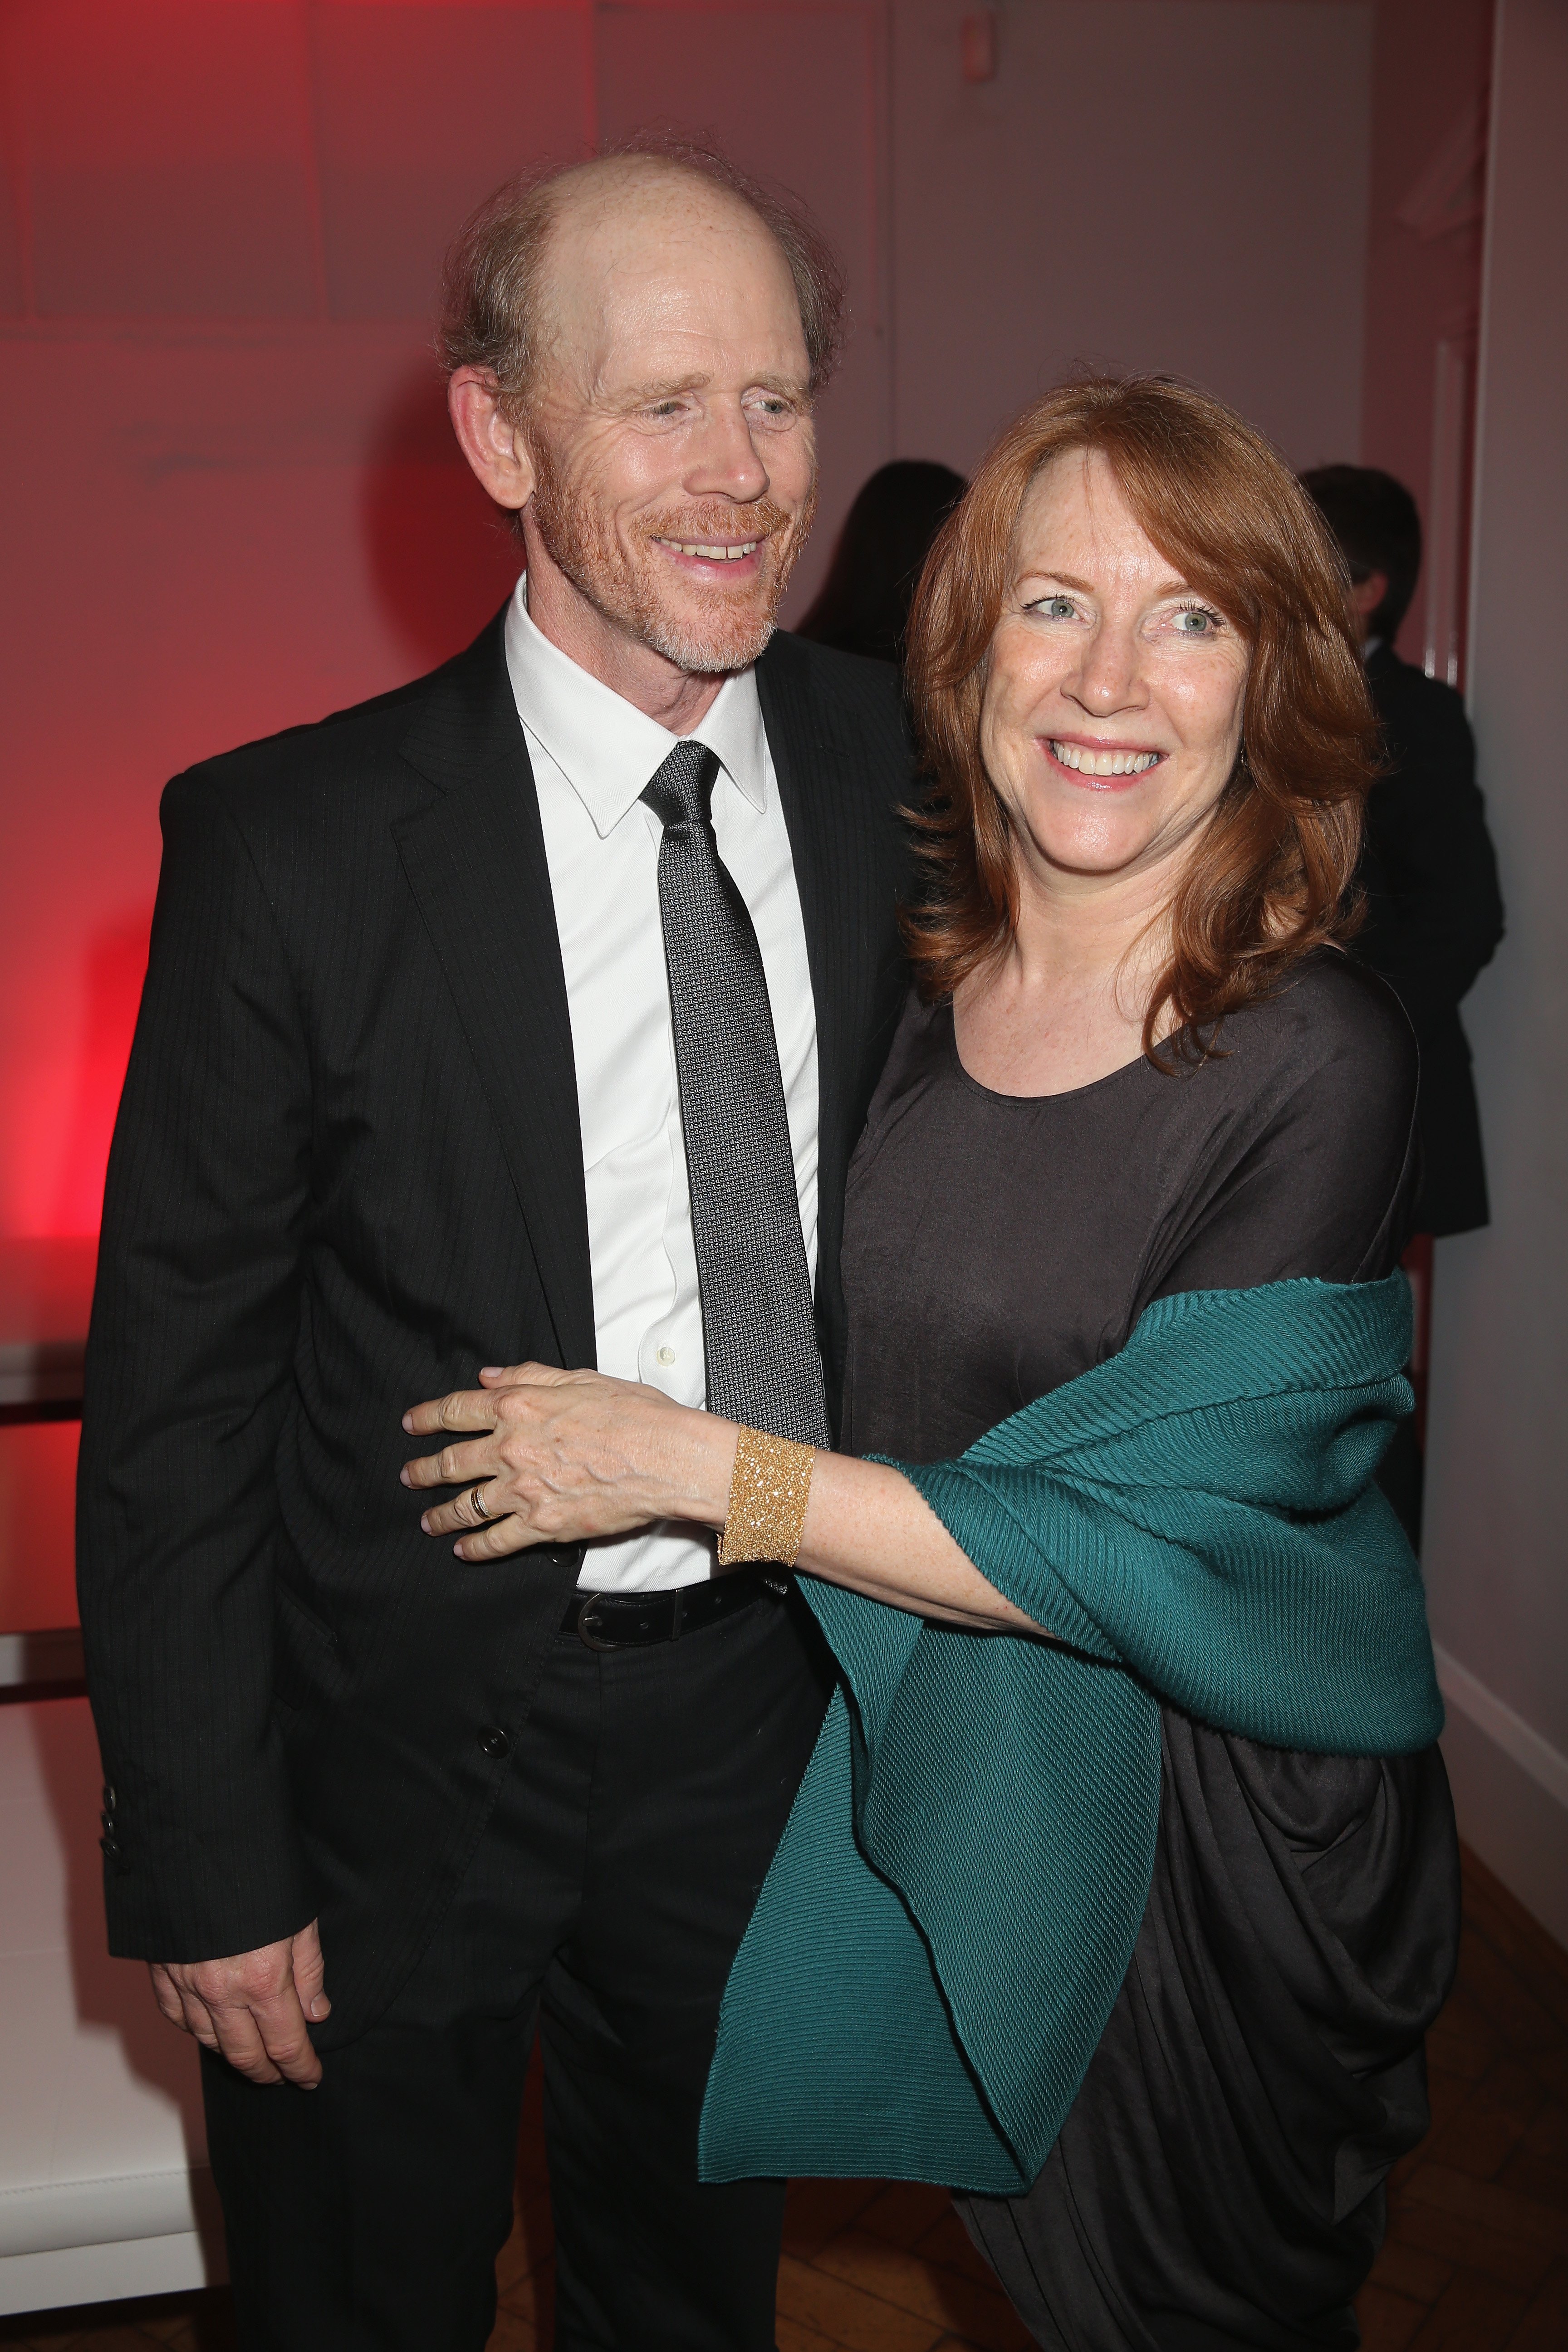 Ron Howard and his wife Cheryl Howard attend the Rush world premiere after party at One Marylebone on September 2, 2013, in London, England. | Source: Getty Images 